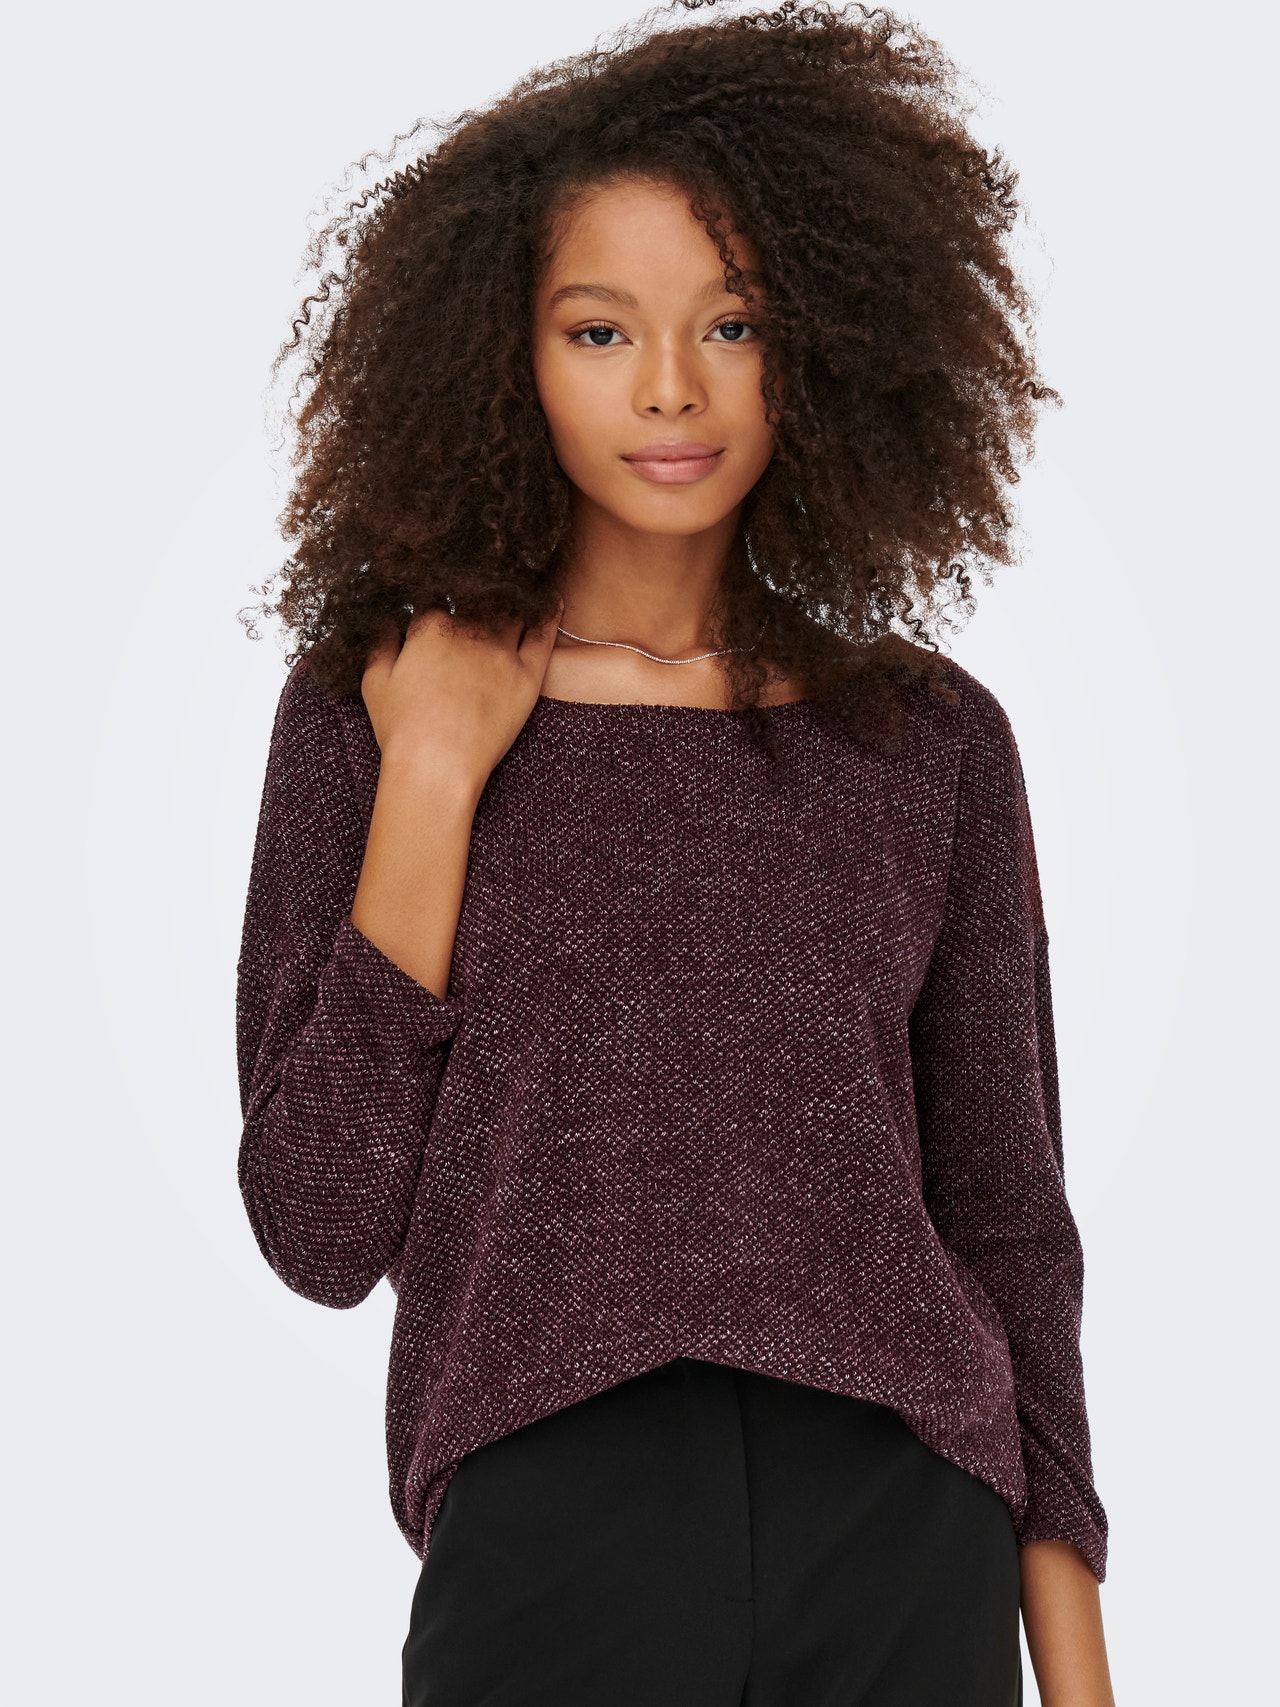 ONLY Oversize Top manches 3/4 -Winetasting - 15177776